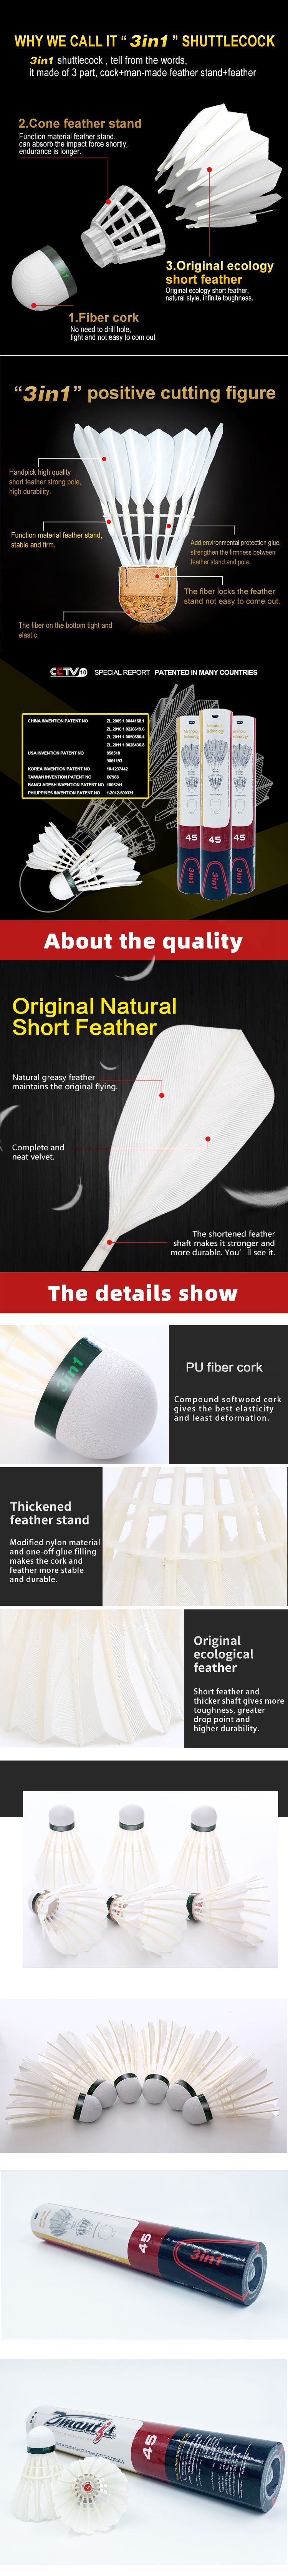 High Performance Durable and Stable Goose Feather Badminton Shuttlecock